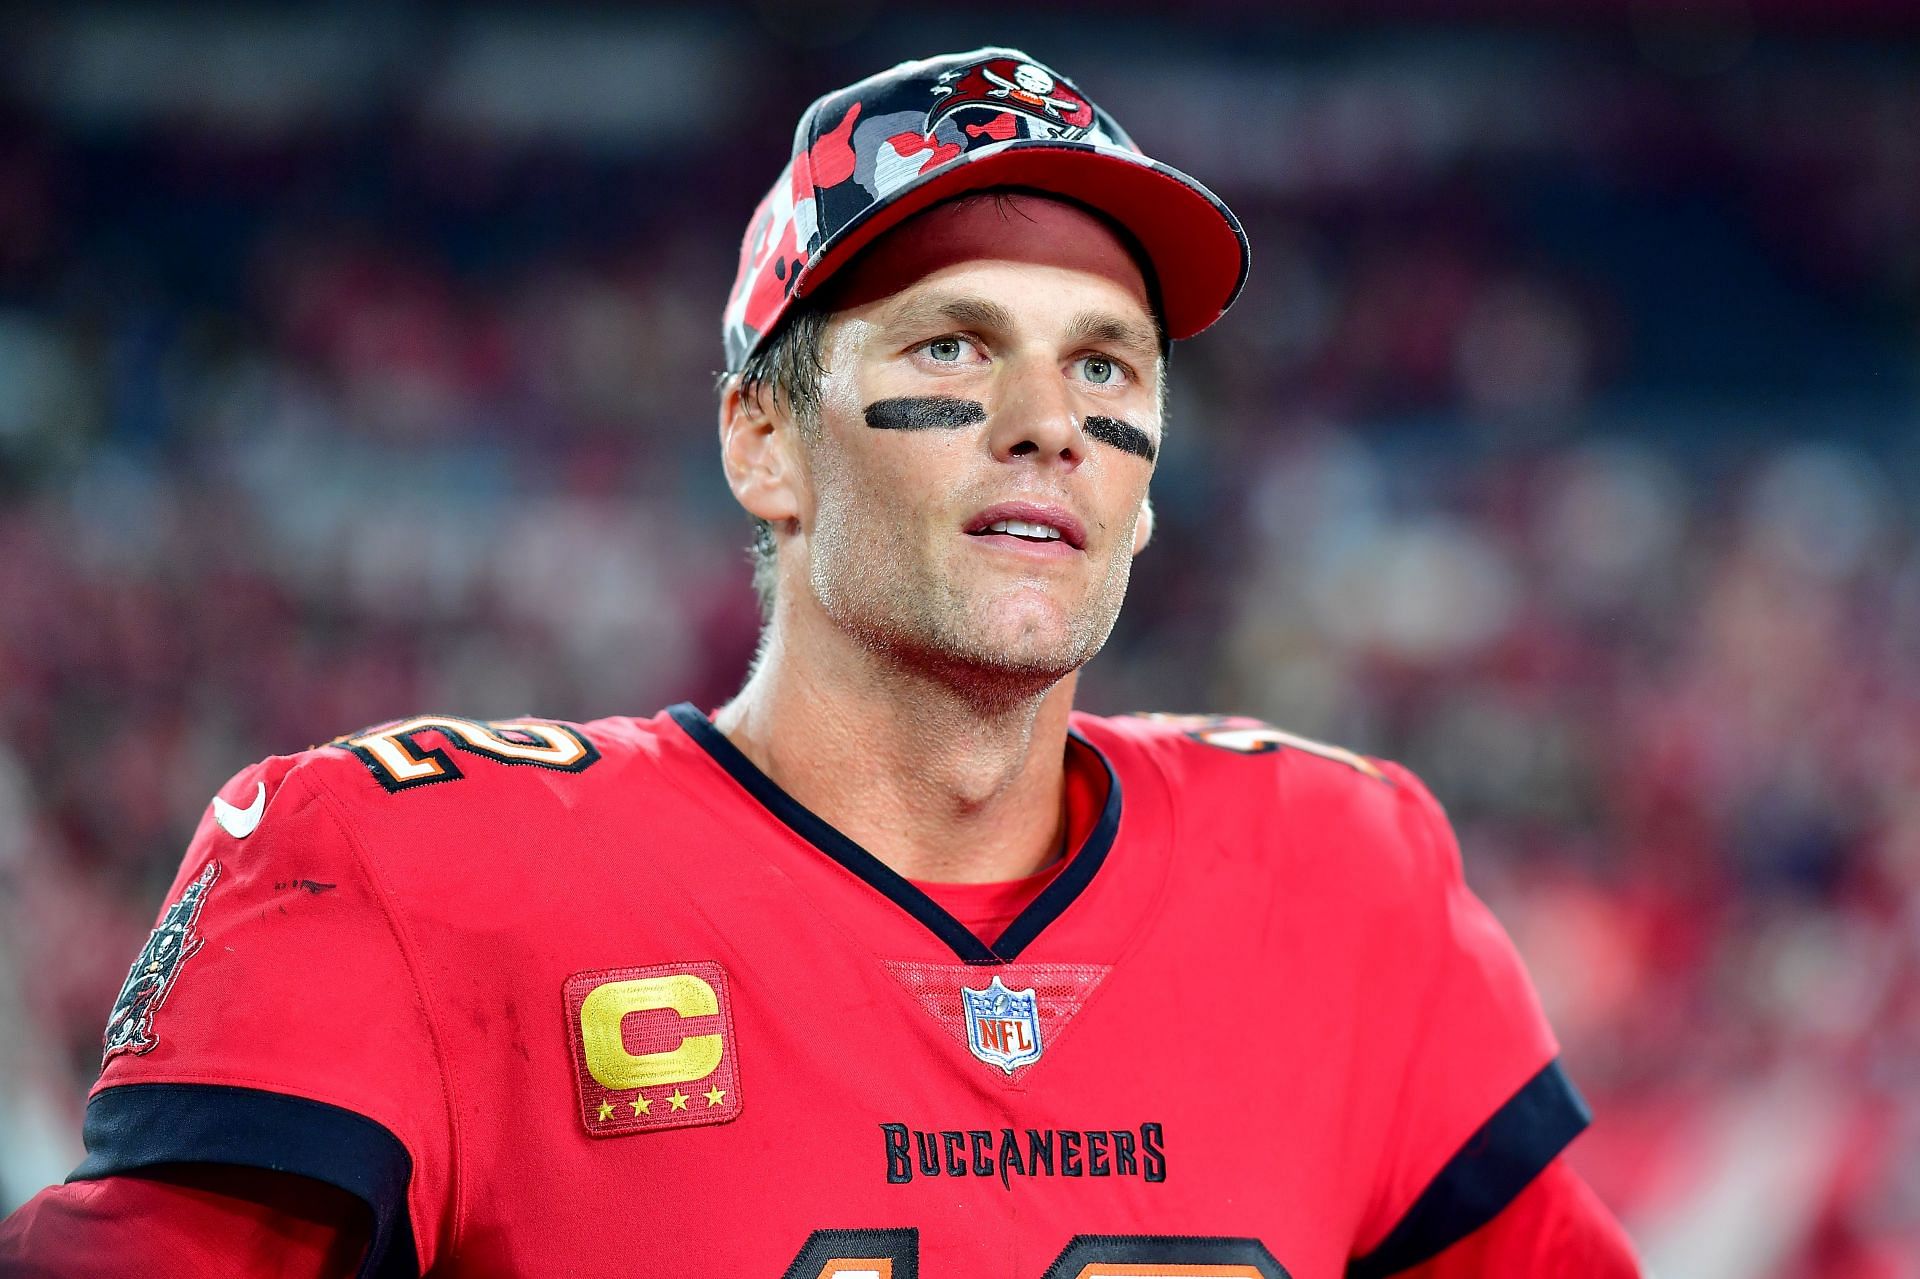 NFL fans blast Tom Brady over his bizarre ticket request for 49ers game -  'He didn't want to pay for better seats?!'